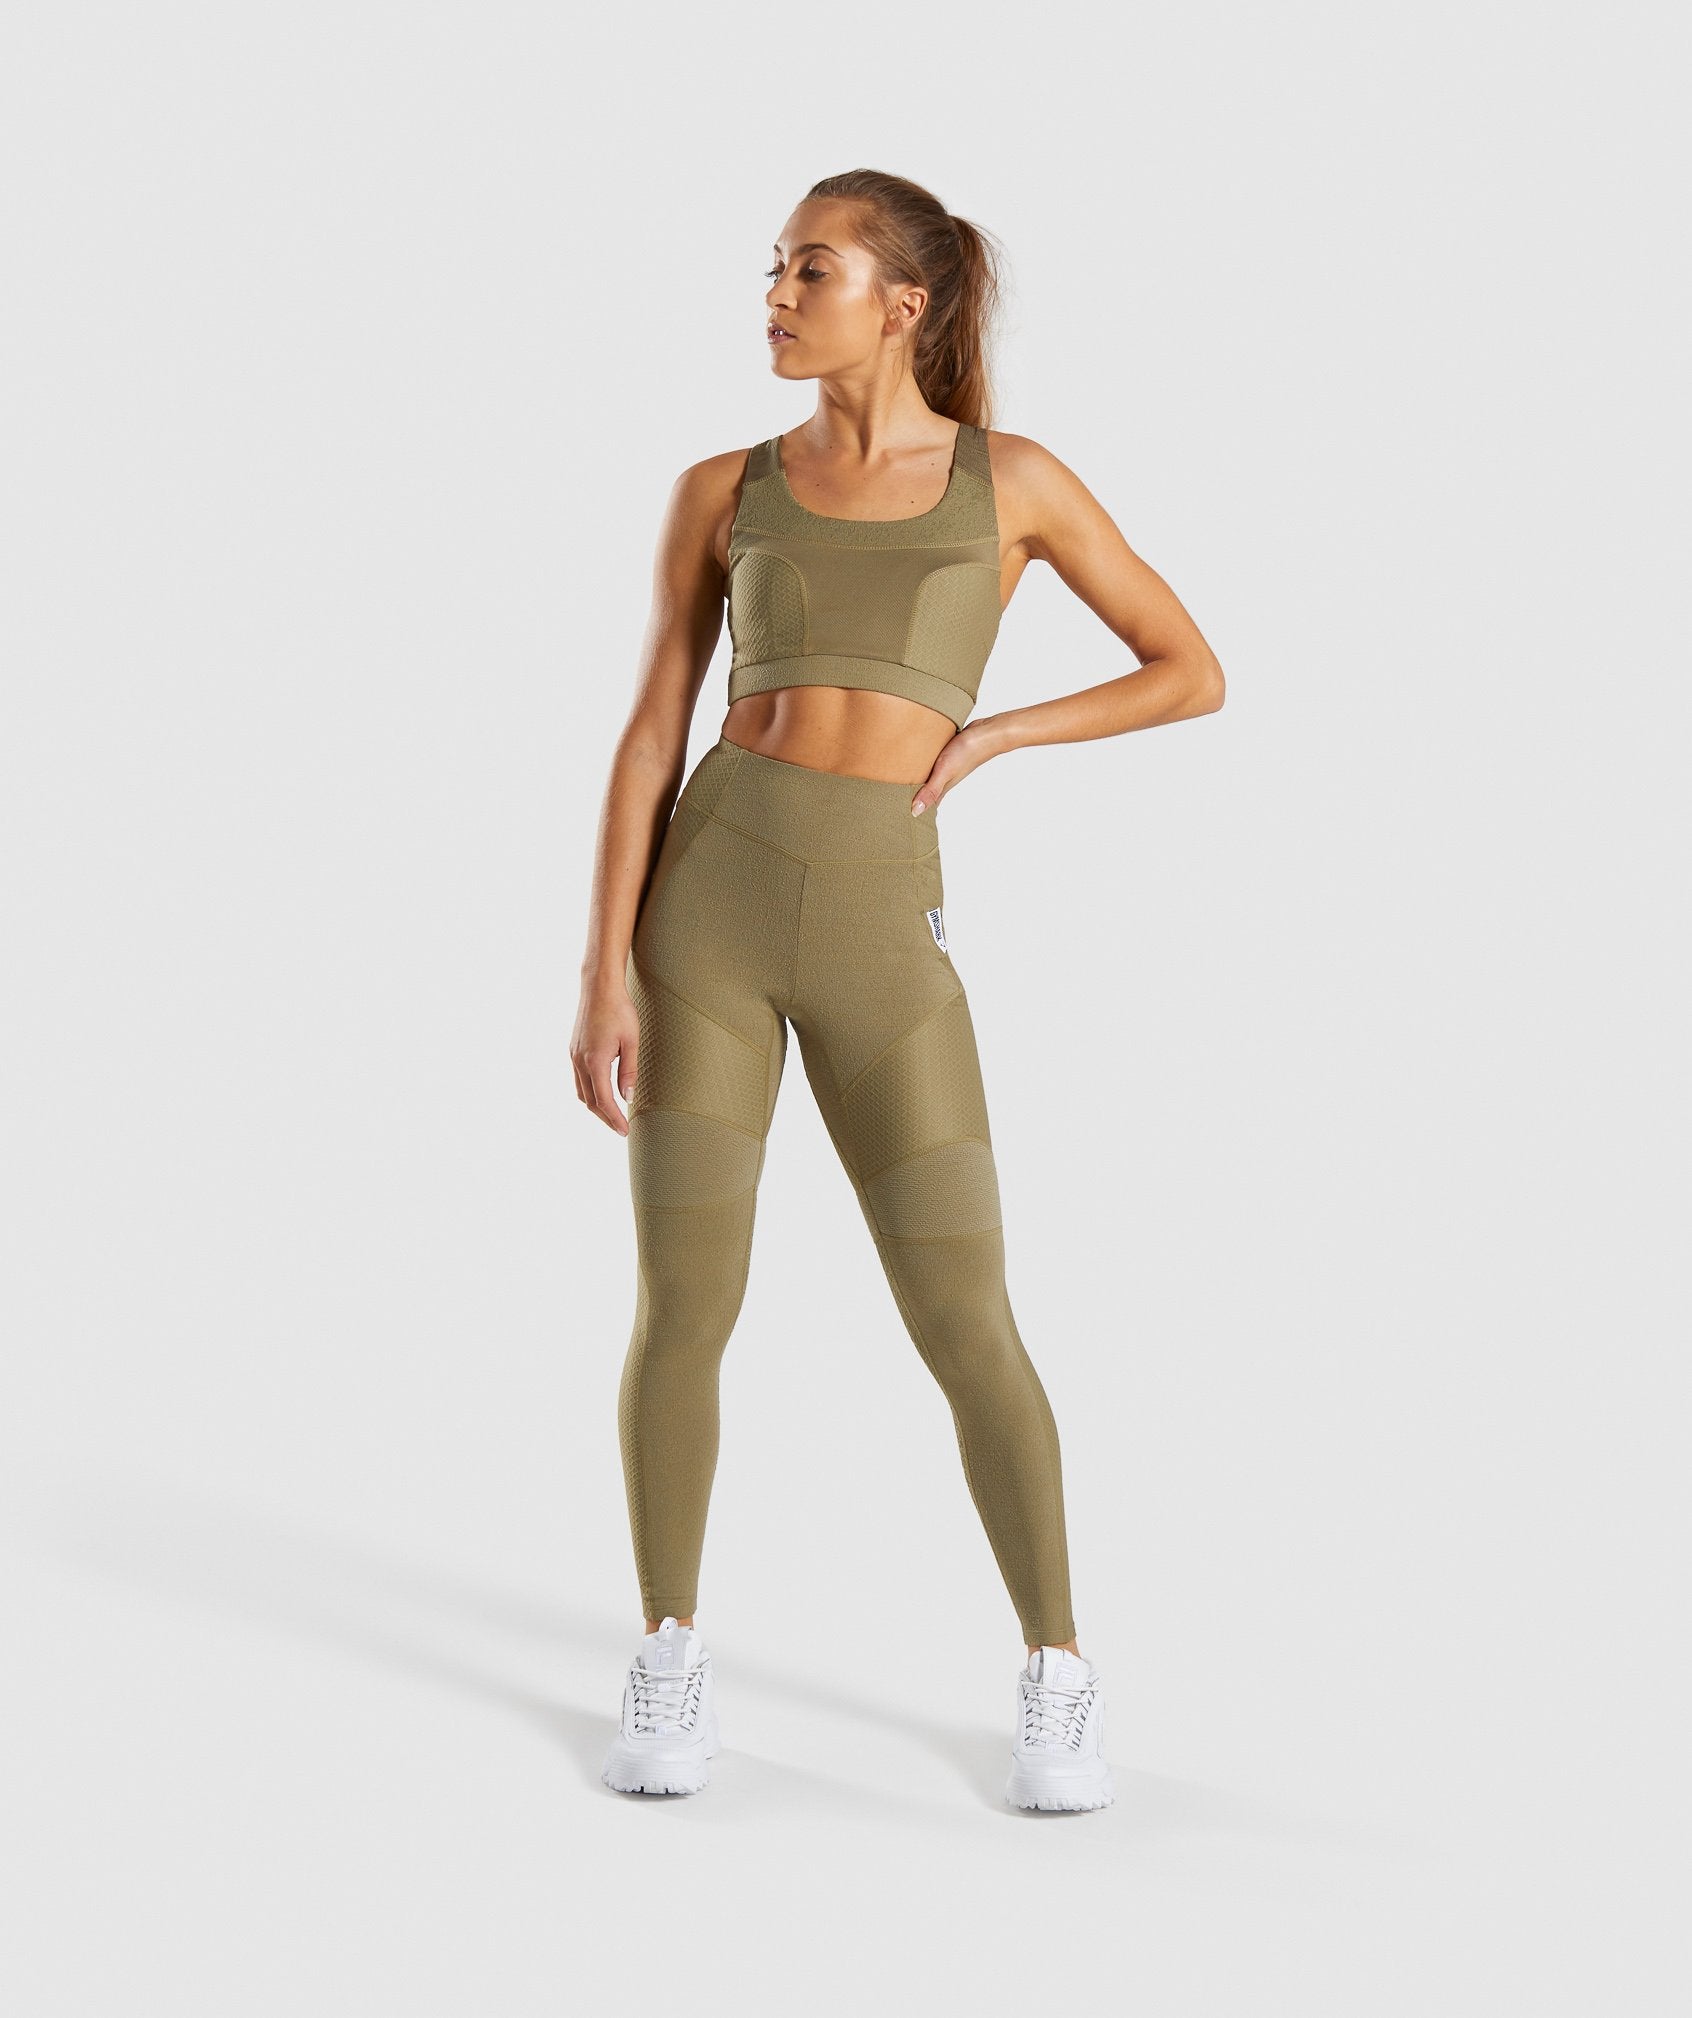 True Texture Leggings in Washed Khaki - view 4